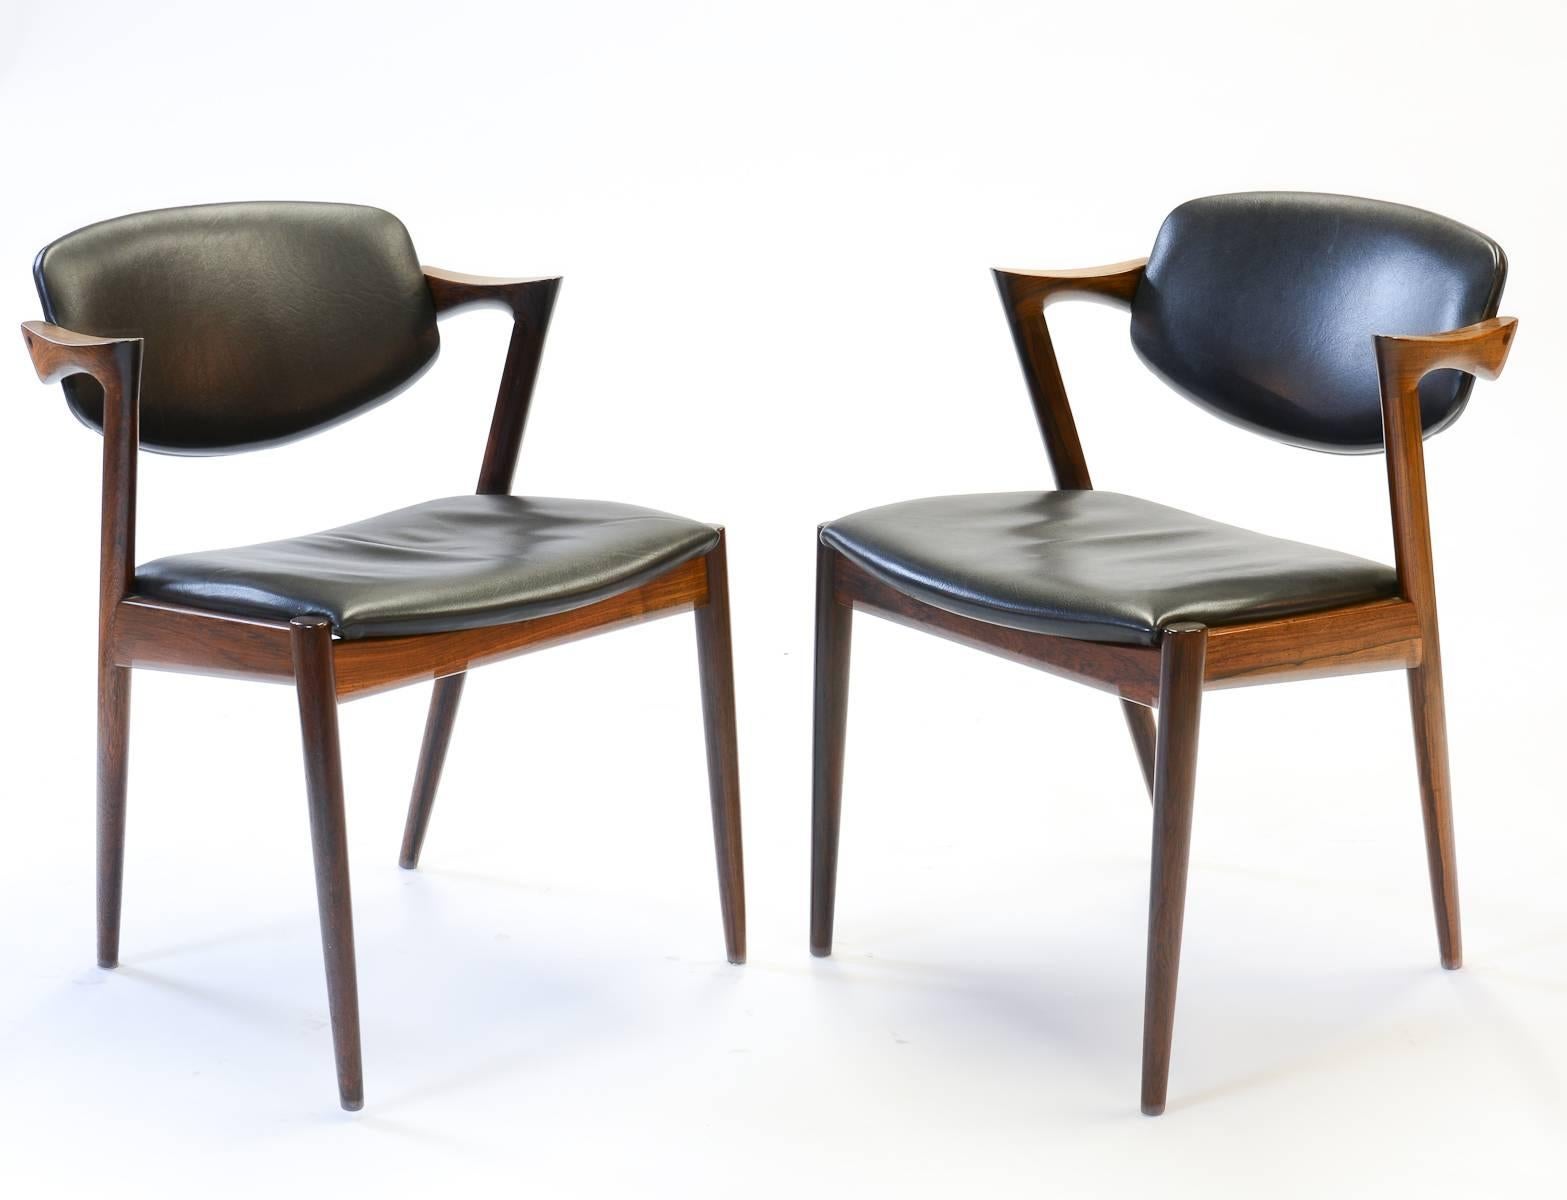 An iconic Danish design in rosewood with black saddle leather backs and seats by legendary designer Kai Kristiansen. The elegant frame lines grandly serve both timeless beauty and highly serviceable comfort. Set of six. Measures: Arm height 26".